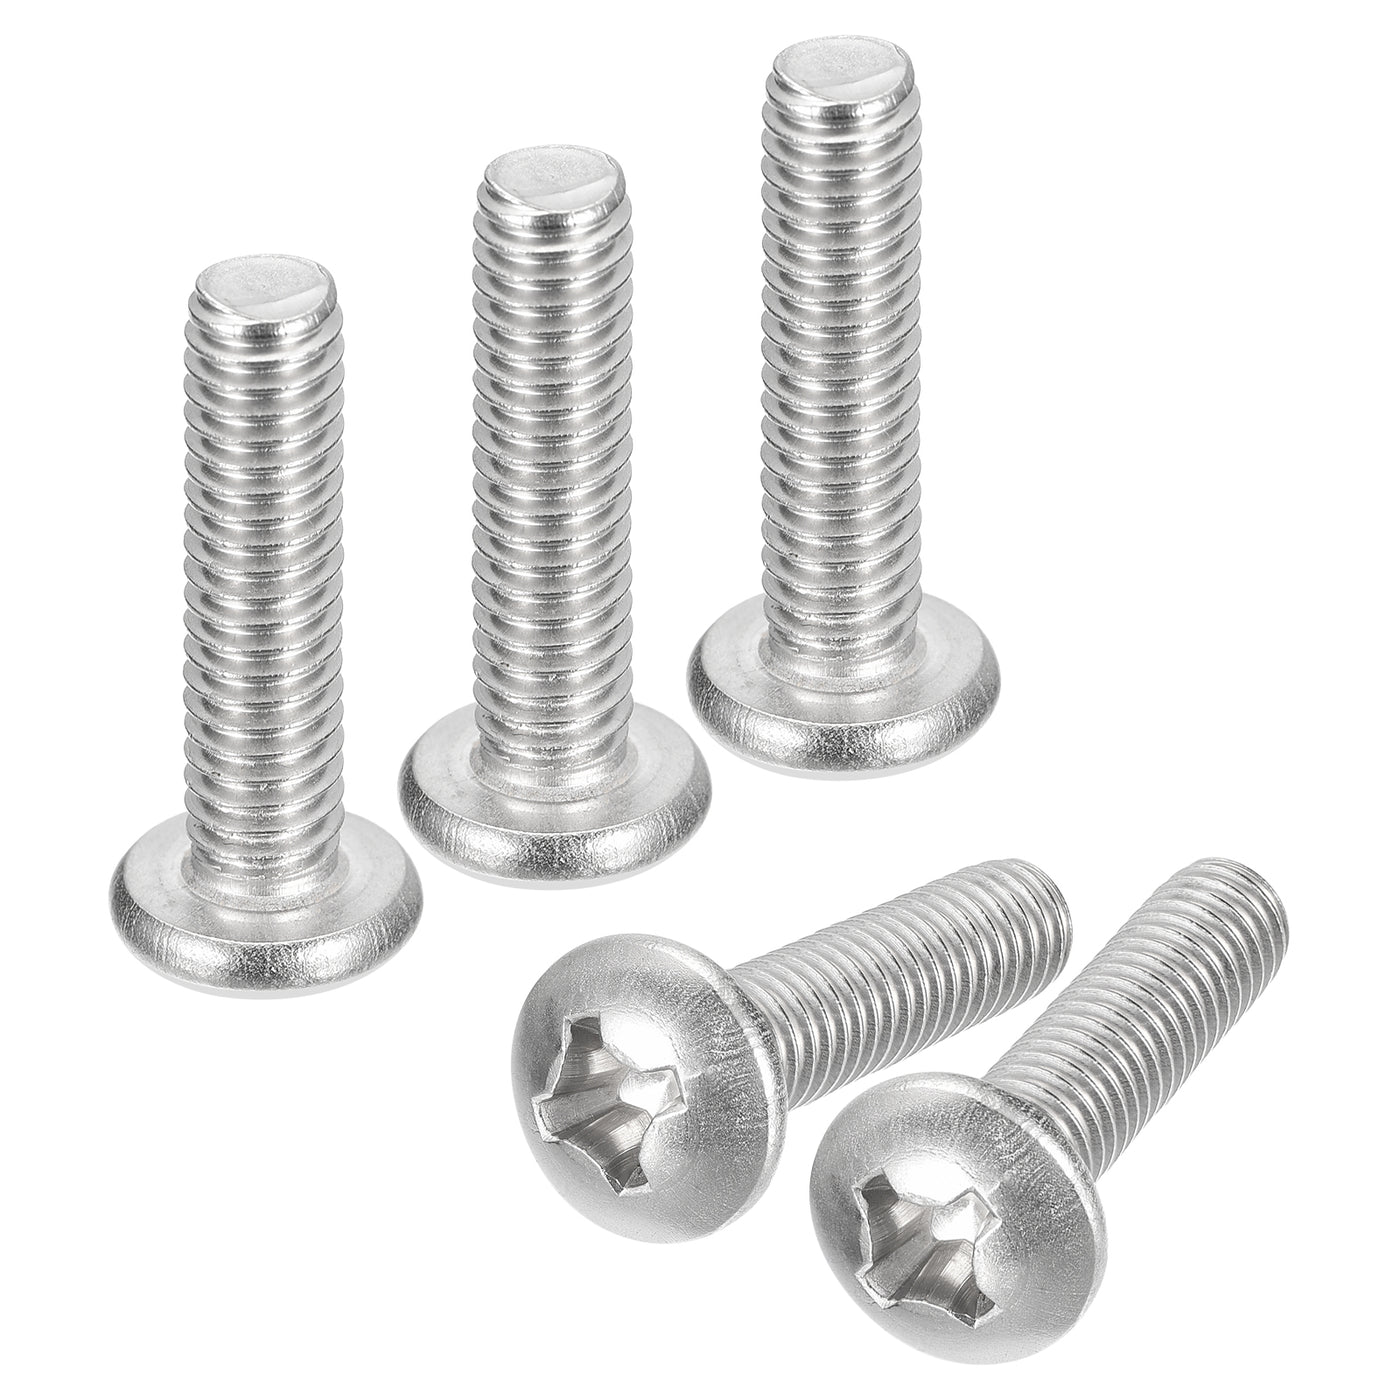 uxcell Uxcell 5/16-18x1-1/4" Pan Head Machine Screws, Stainless Steel 18-8 Screw, Pack of 10